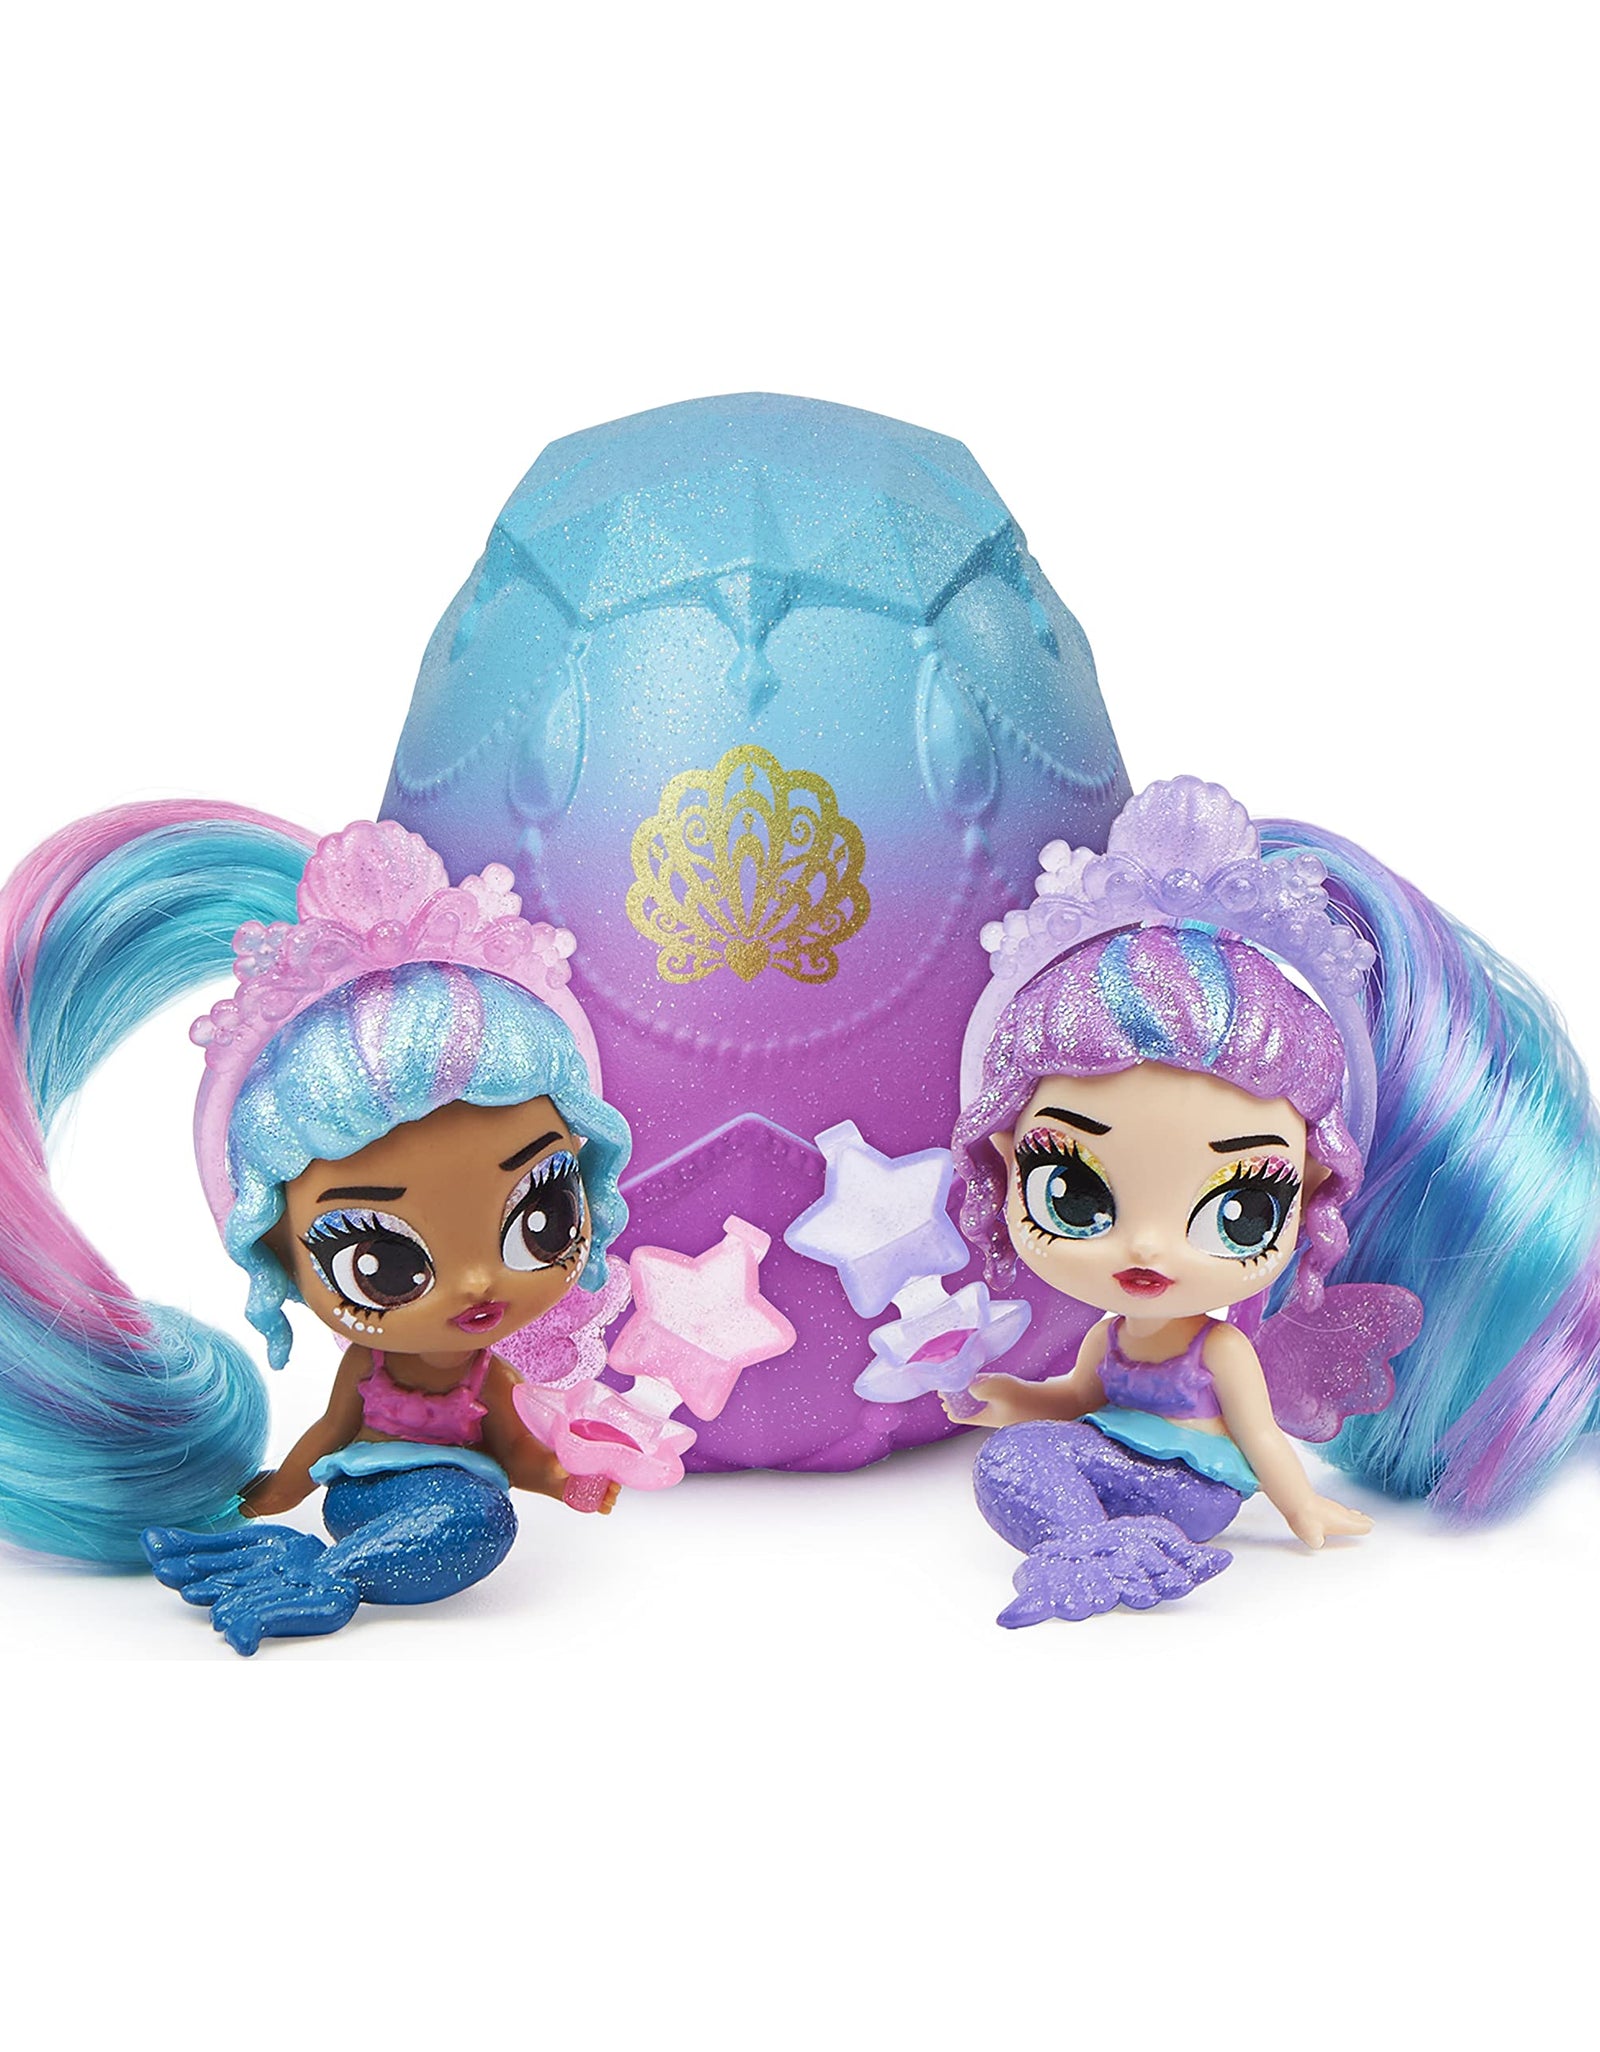 Hatchimals Pixies, Mermaids 2-Pack Collectible Dolls & Accessories (Styles May Vary), Girl Toys for Ages 5 and up